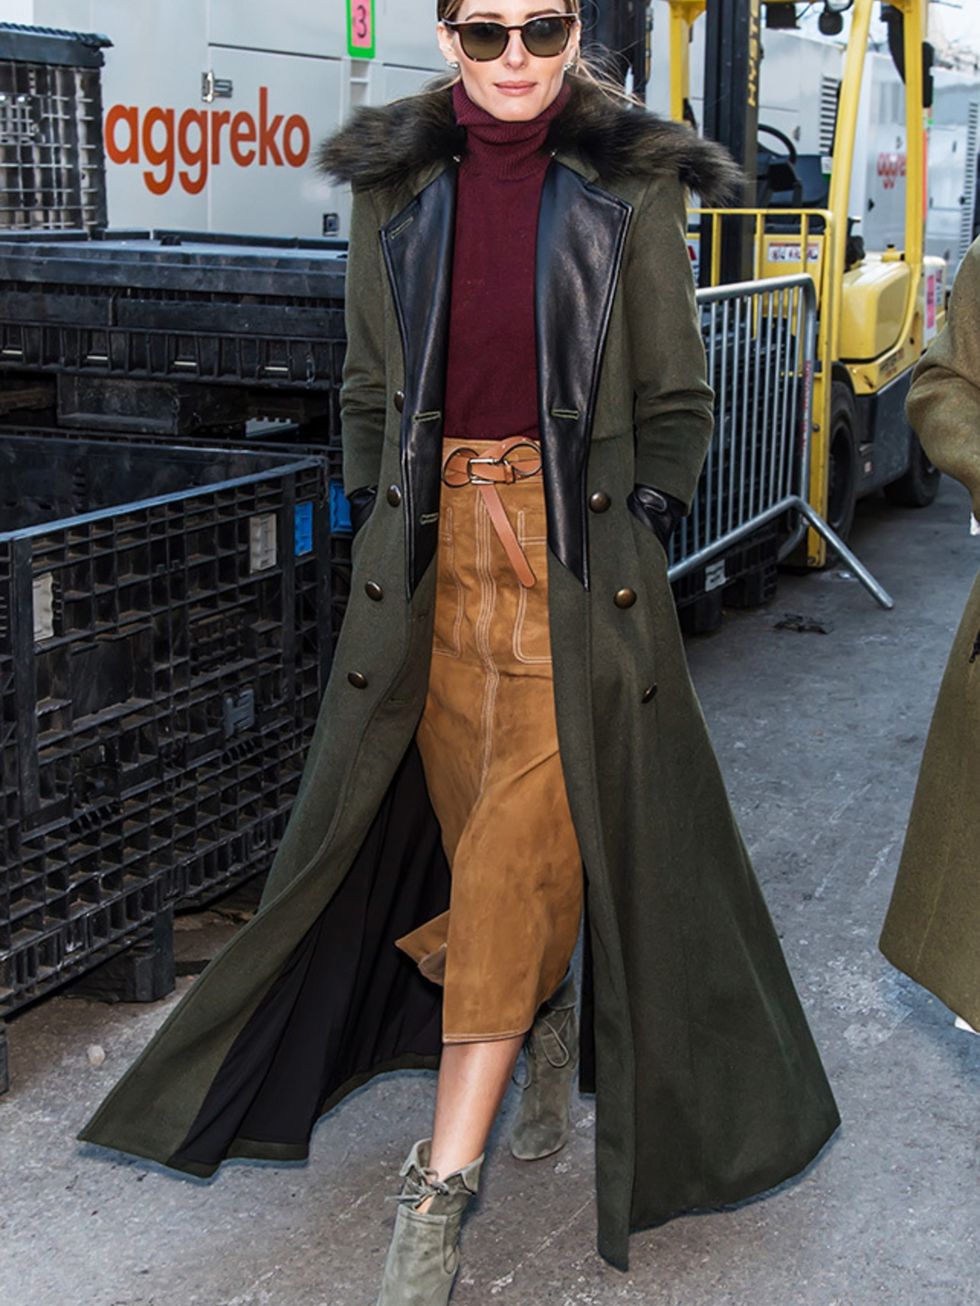 <p><a href="http://www.elleuk.com/fashion/celebrity-style/olivia-palermo" target="_blank">Olivia Palermo</a> wearing a Marks and Spencer suede skirt</p>